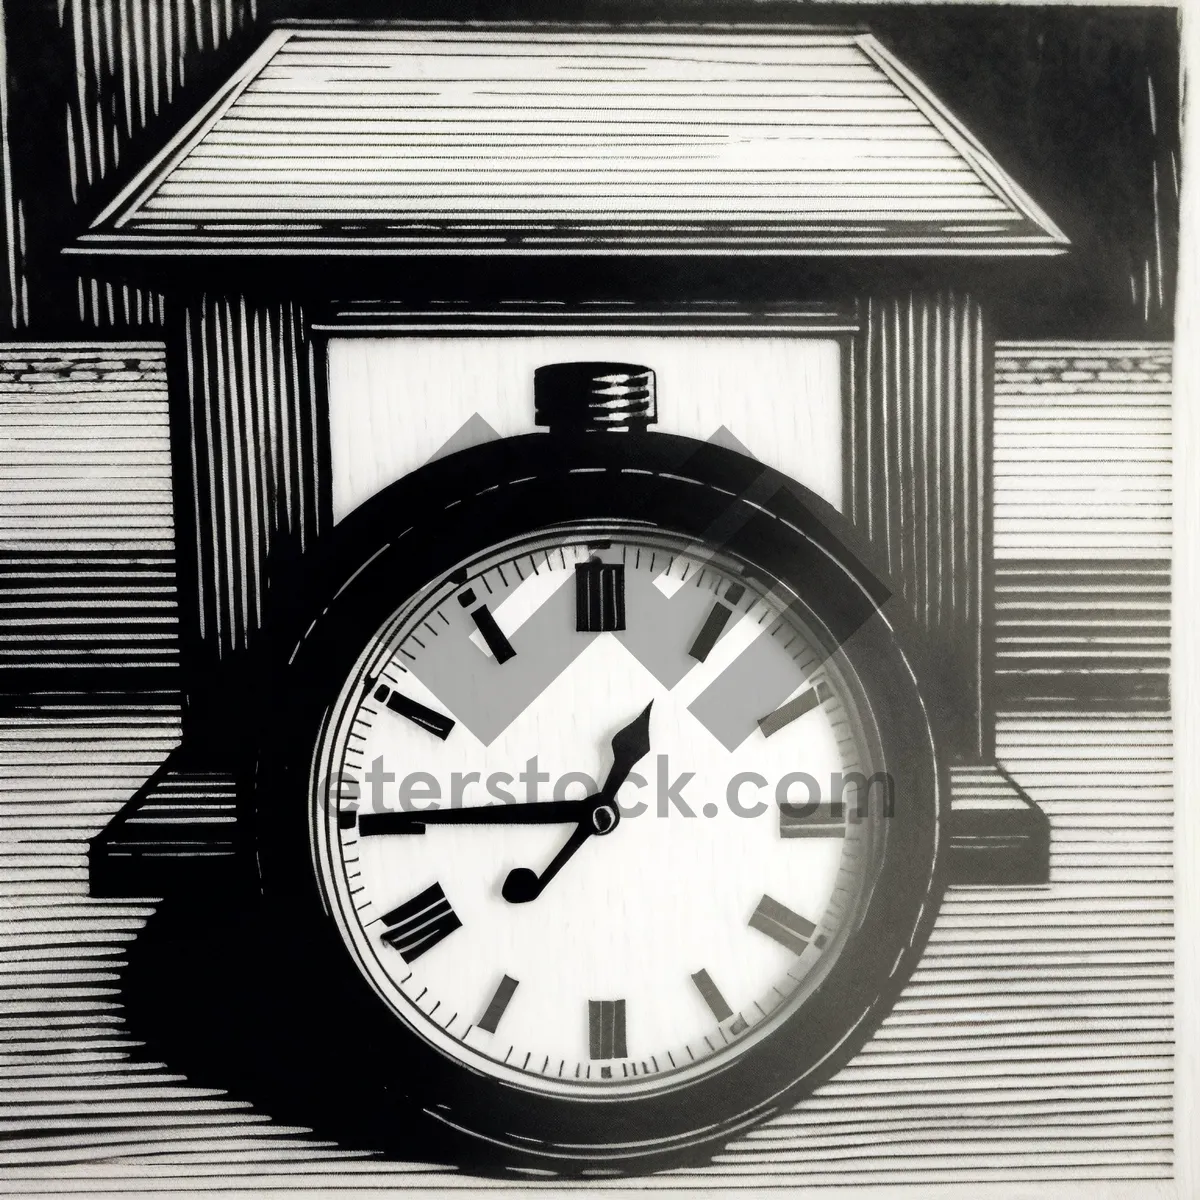 Picture of Antique analog clock ticking, showing time.